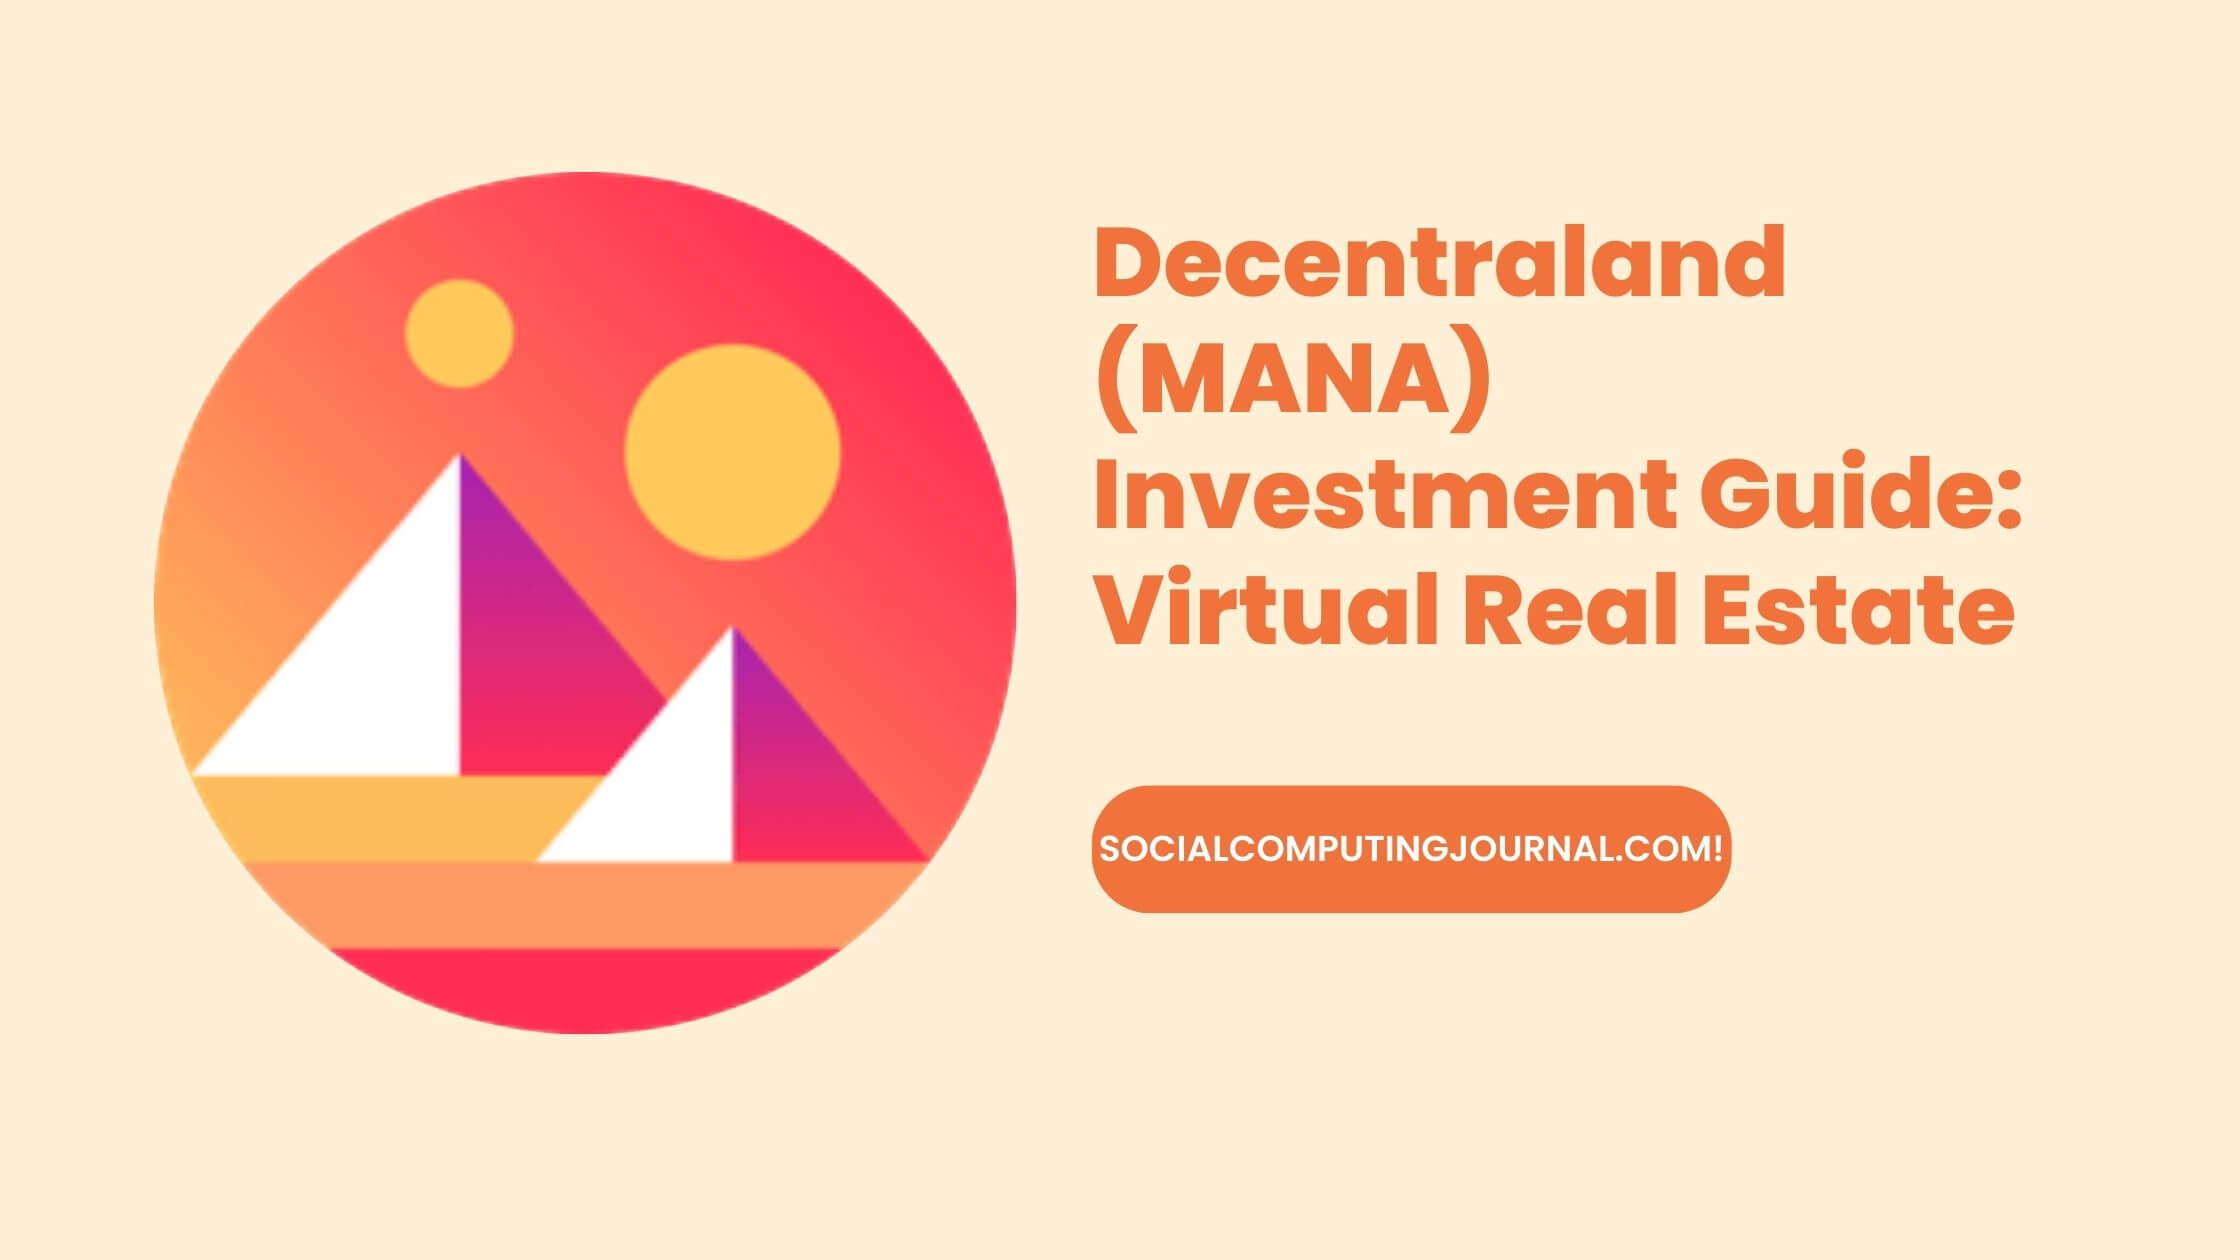 Decentraland (MANA) Investment Guide Virtual Real Estate